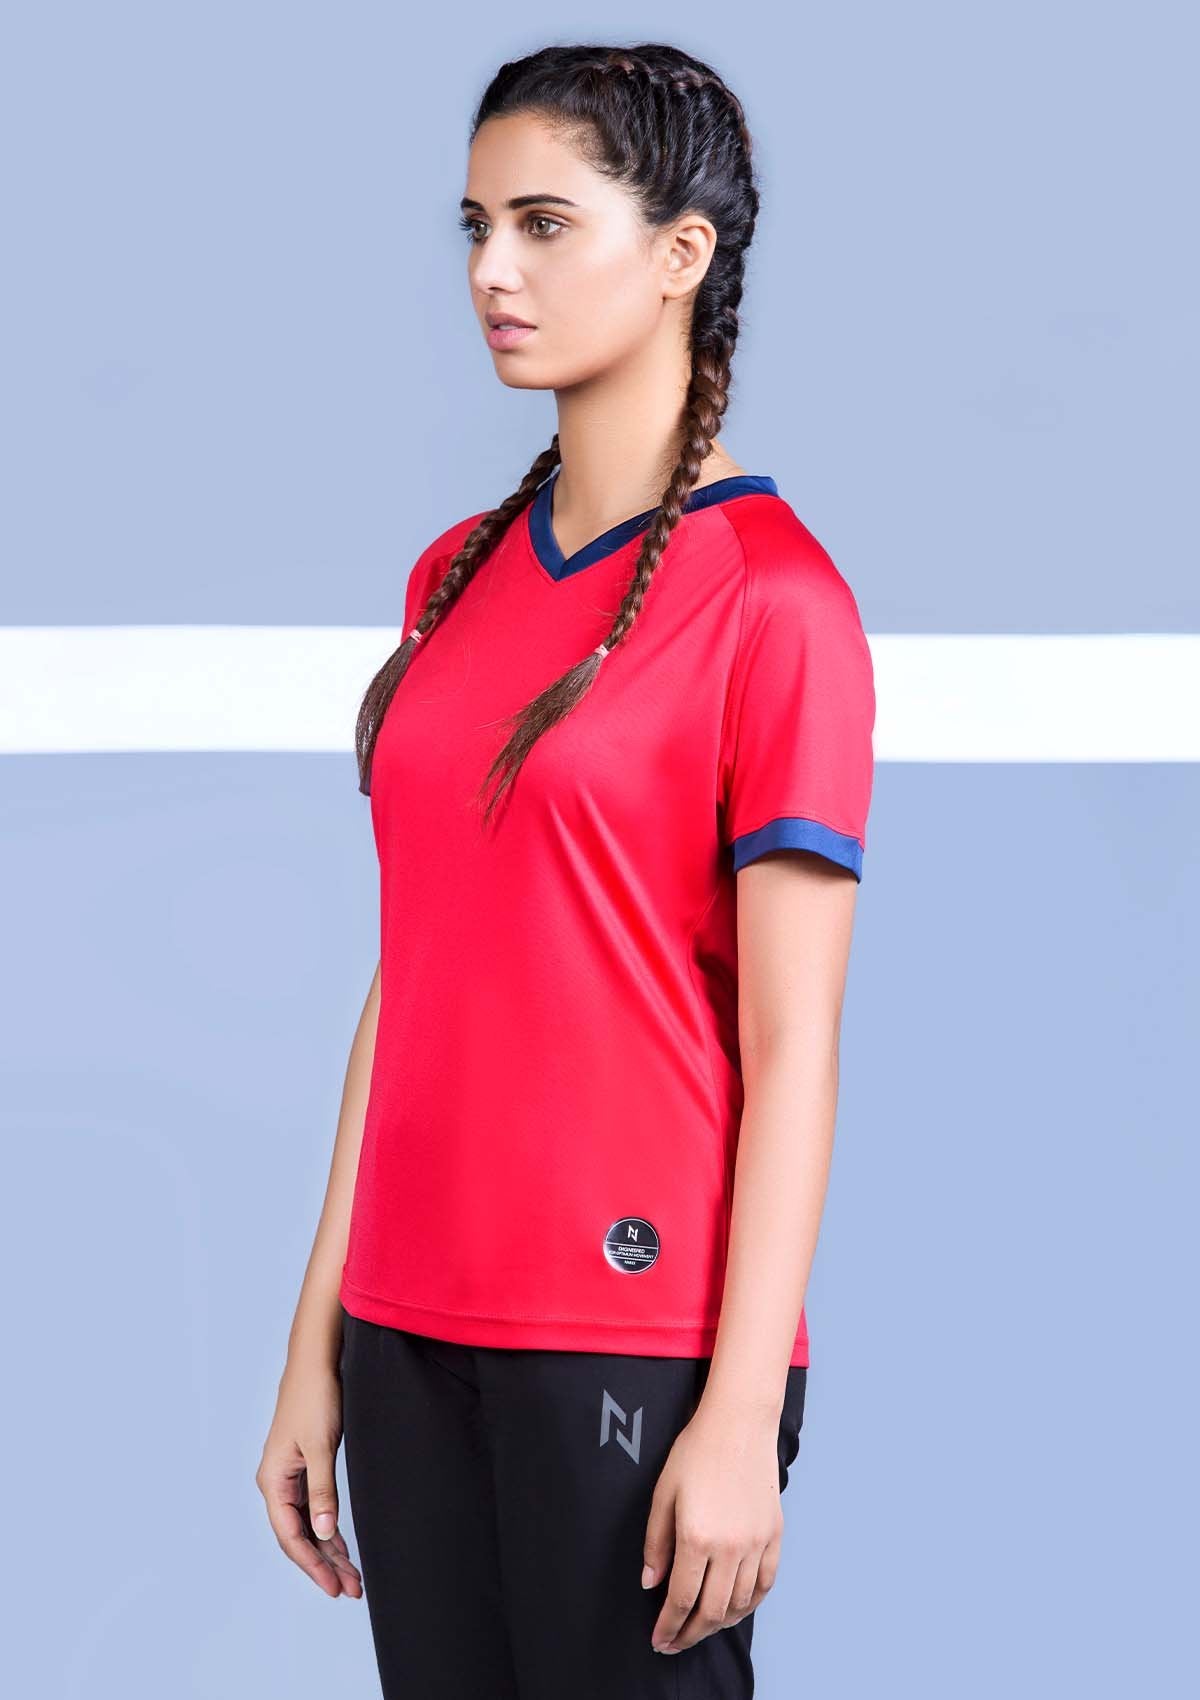 TRAINING TOP VN - NEON RED - Nomad Apparel